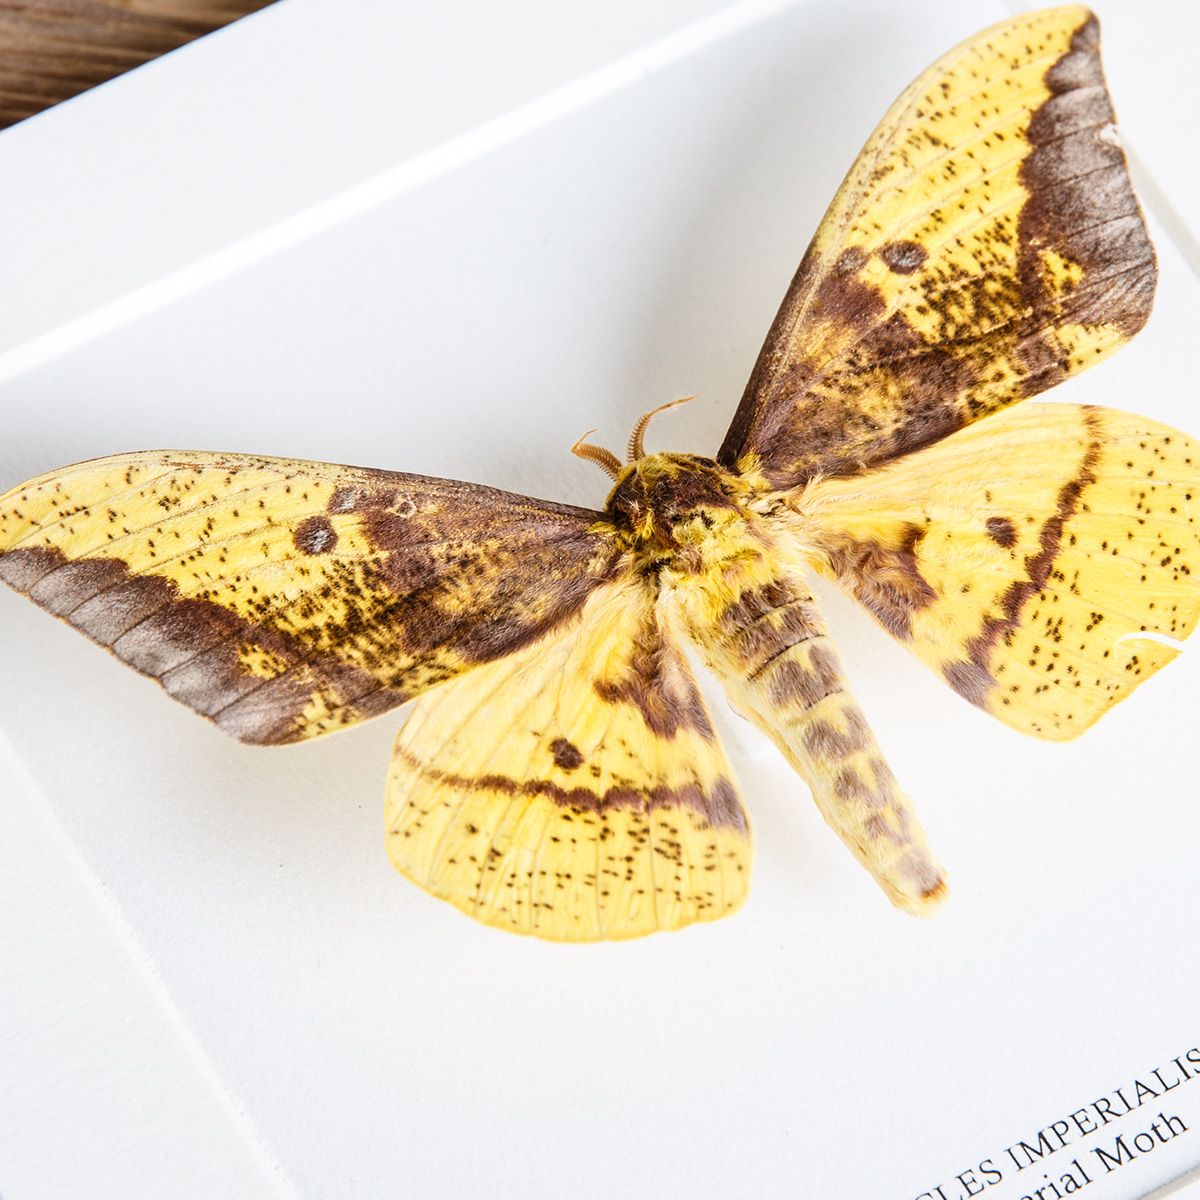 Imperial Moth in Box Frame (Eacles imperialis)